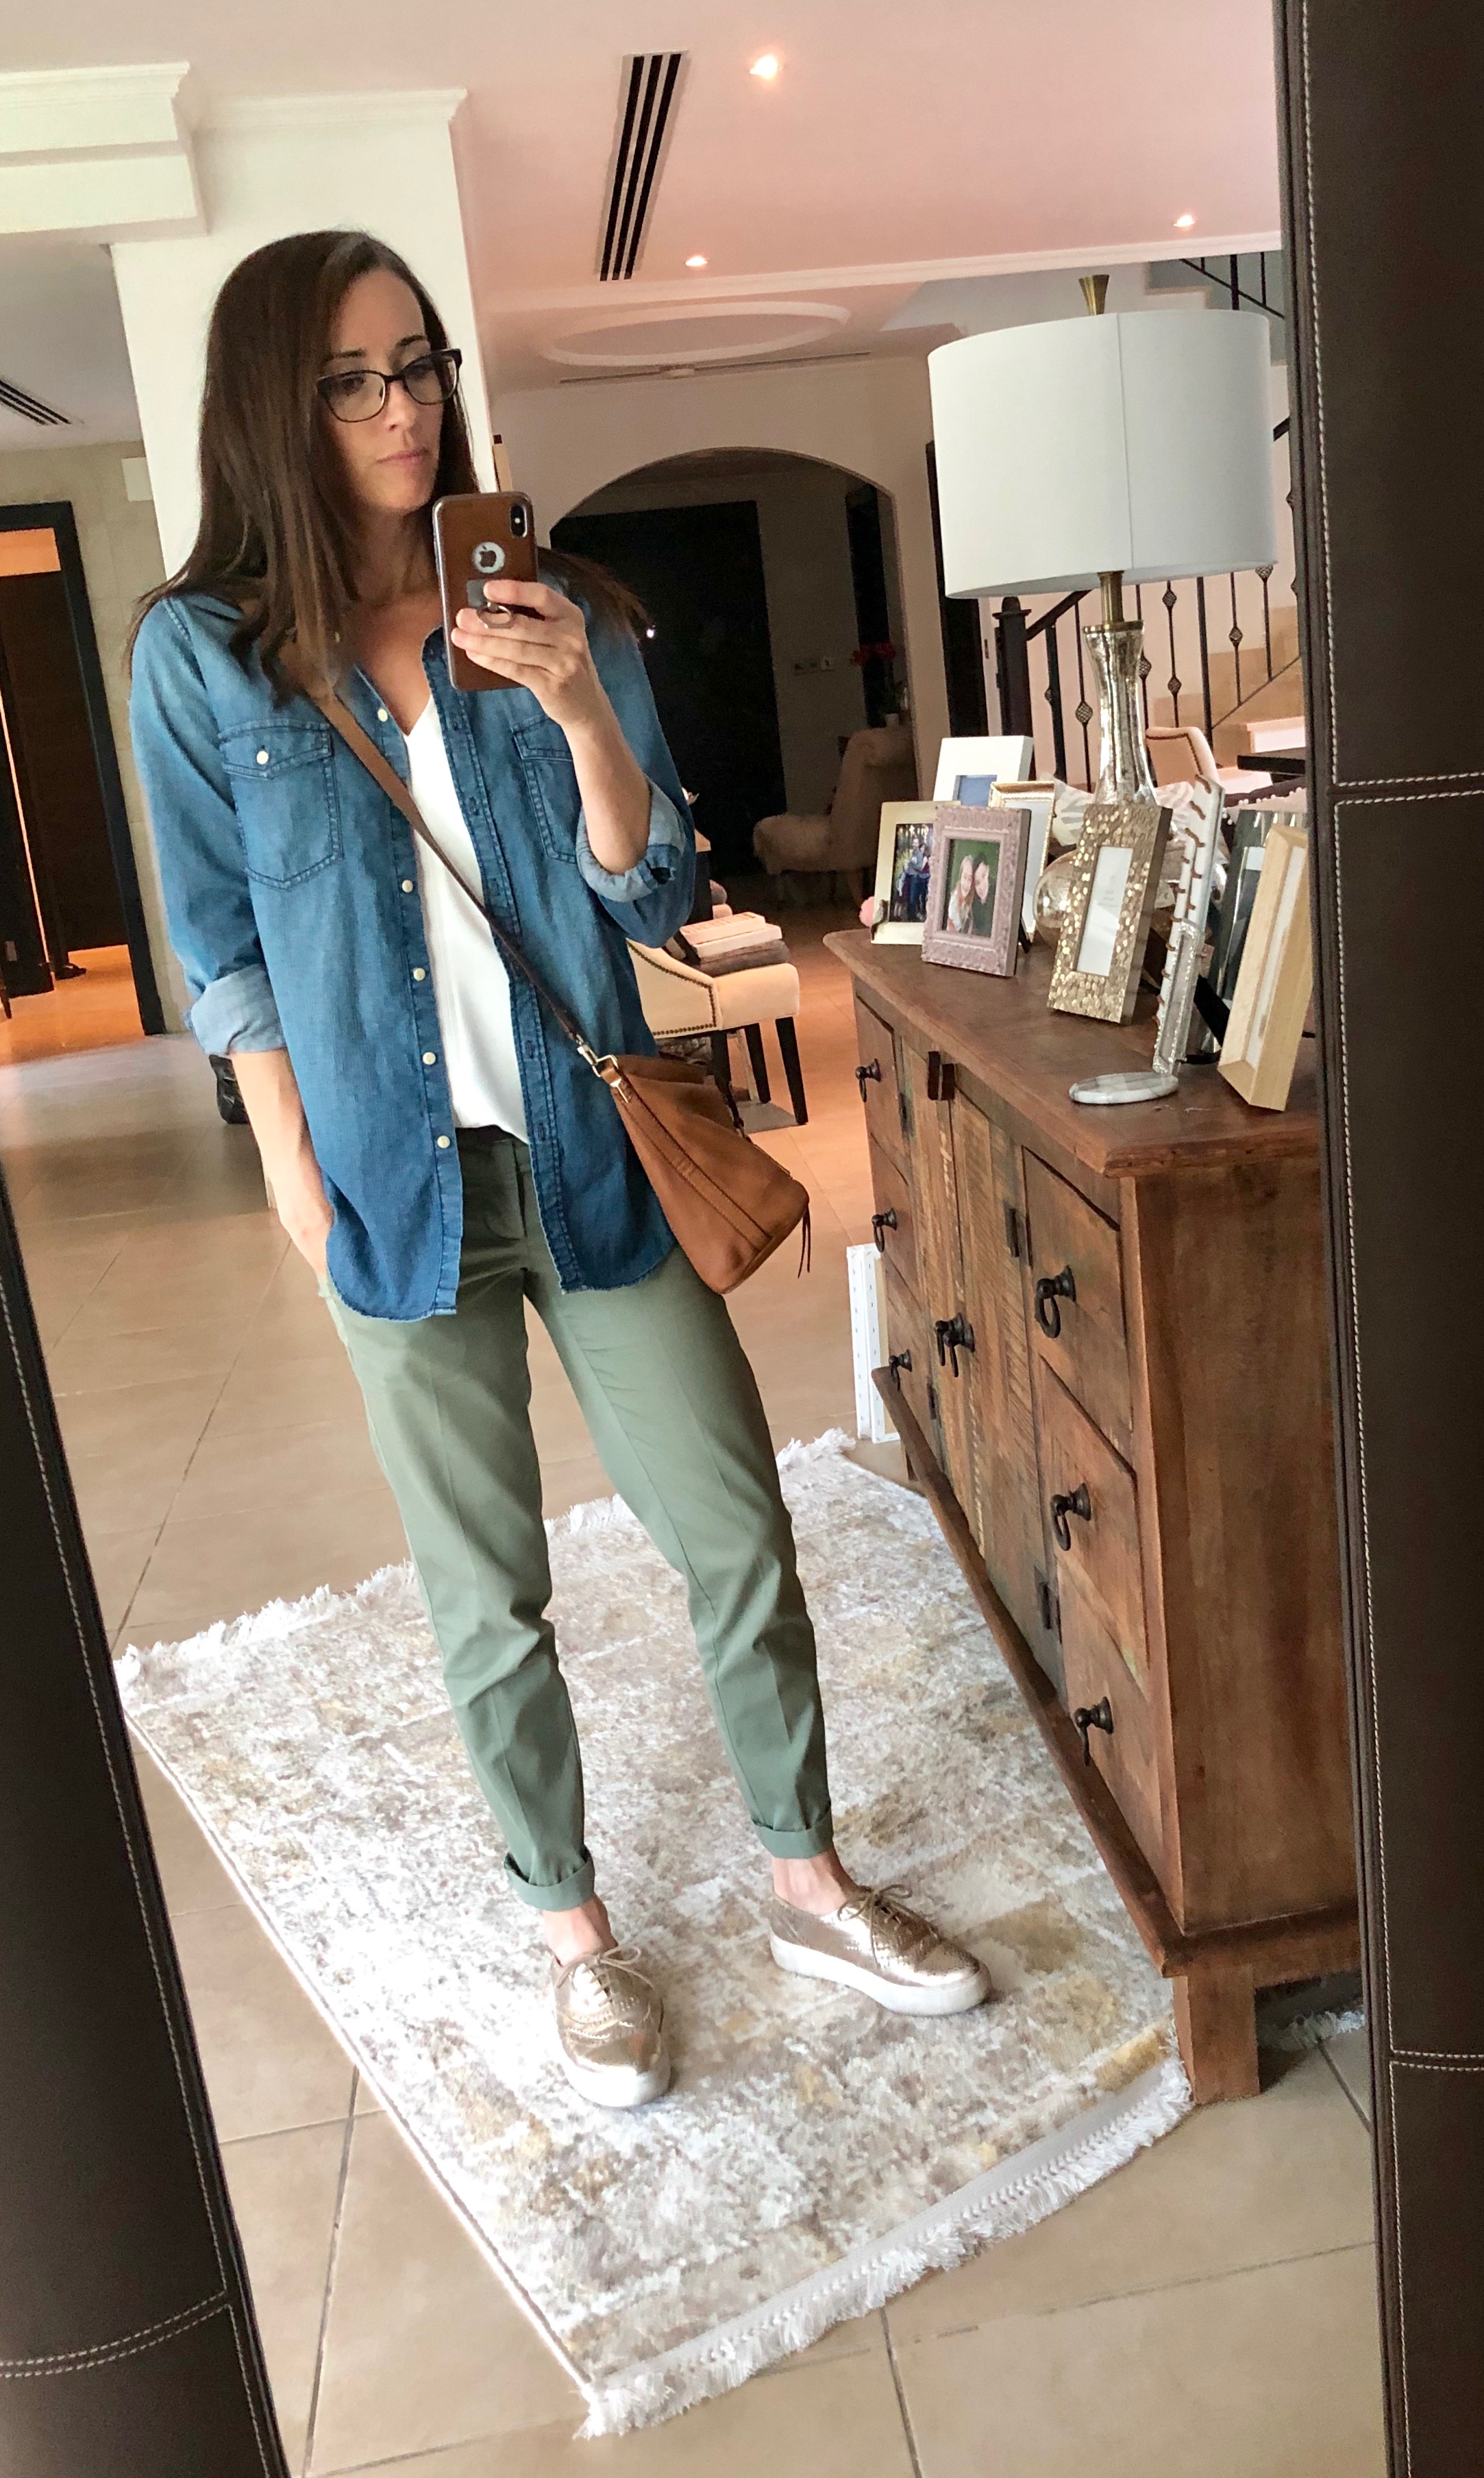 neutrals, white top, khaki pants, dressed up, dressed down, casual, everyday style, method39, style advisor, my style, wear it, as seen on me, how to get dressed, versatile wardrobe, look your best